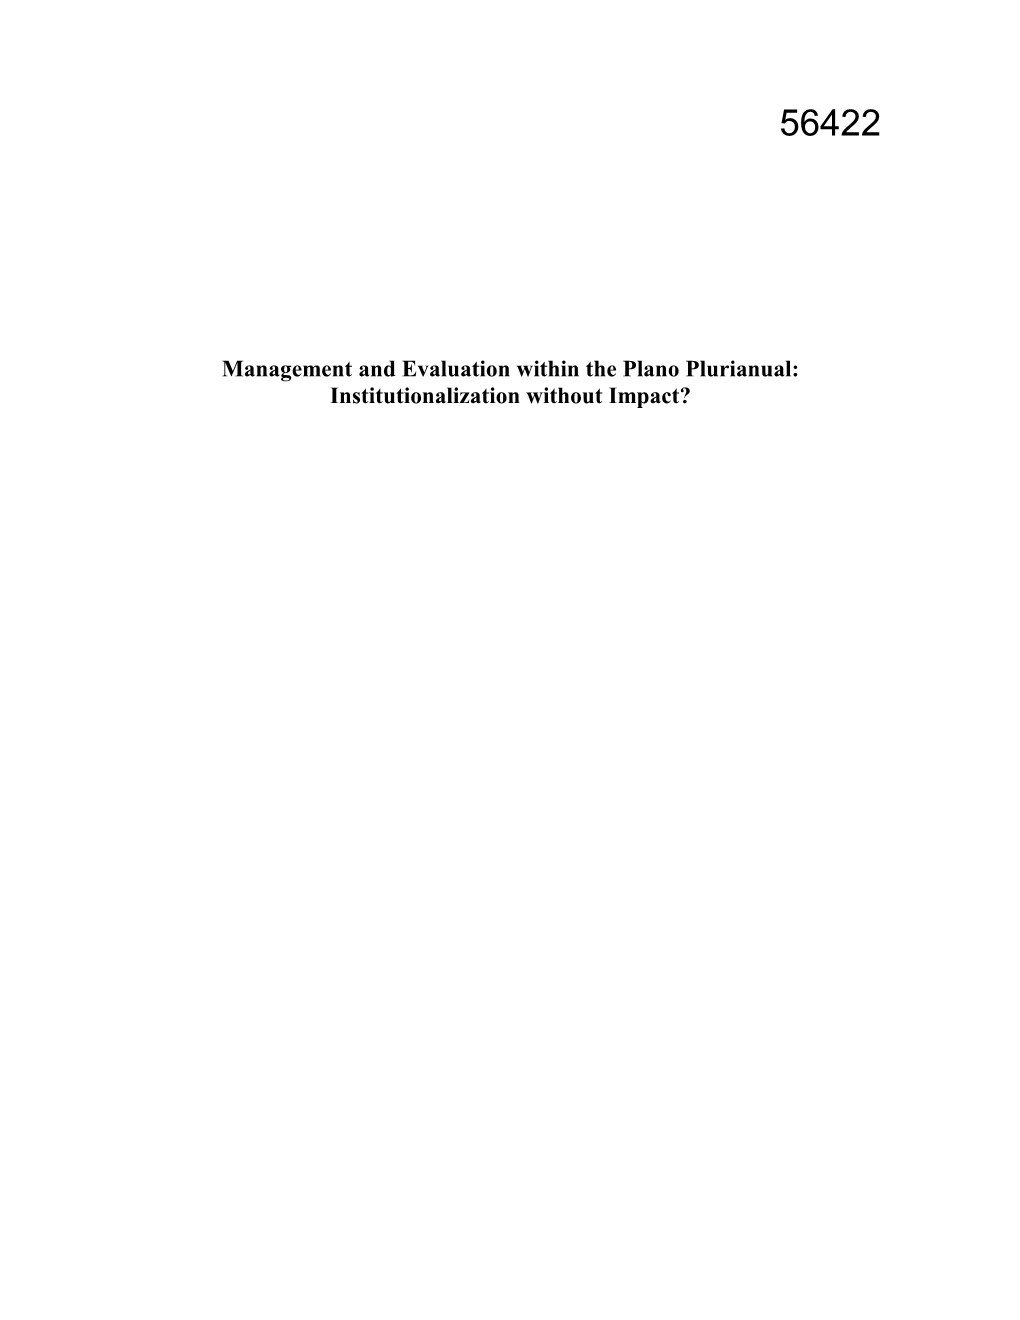 Management and Evaluation Within the Plano Plurianual